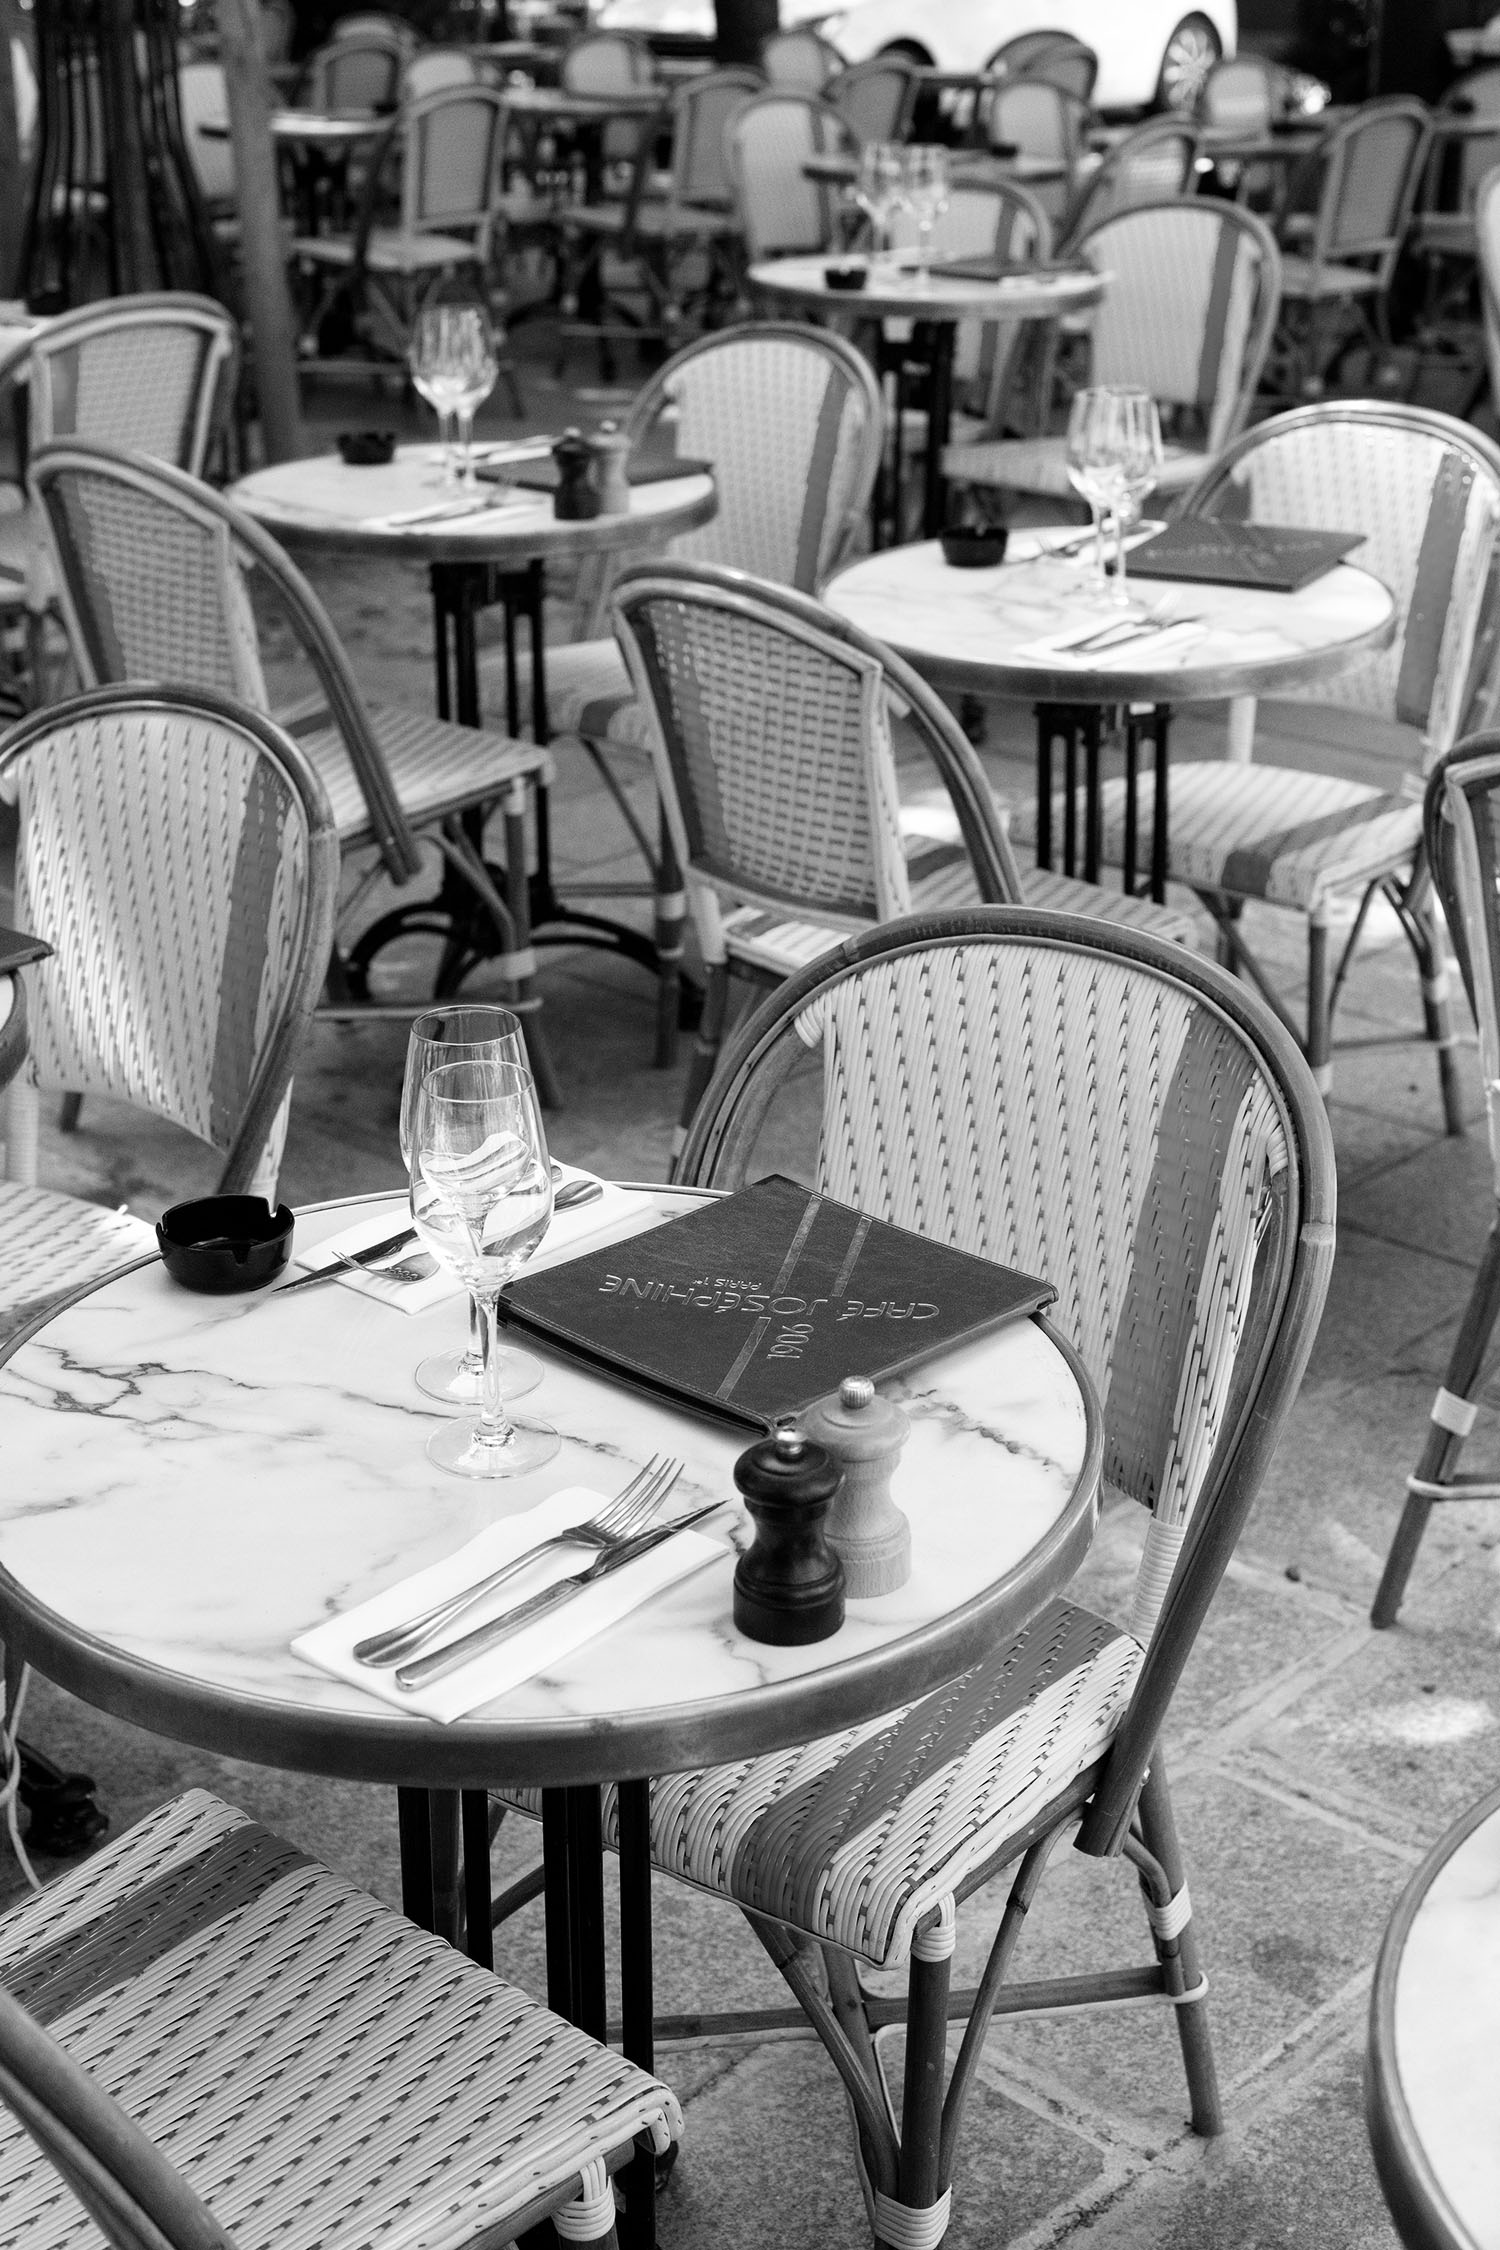 Coco & Voltaire - Tables and chairs on the terrace at Chez Josephine in Paris, France